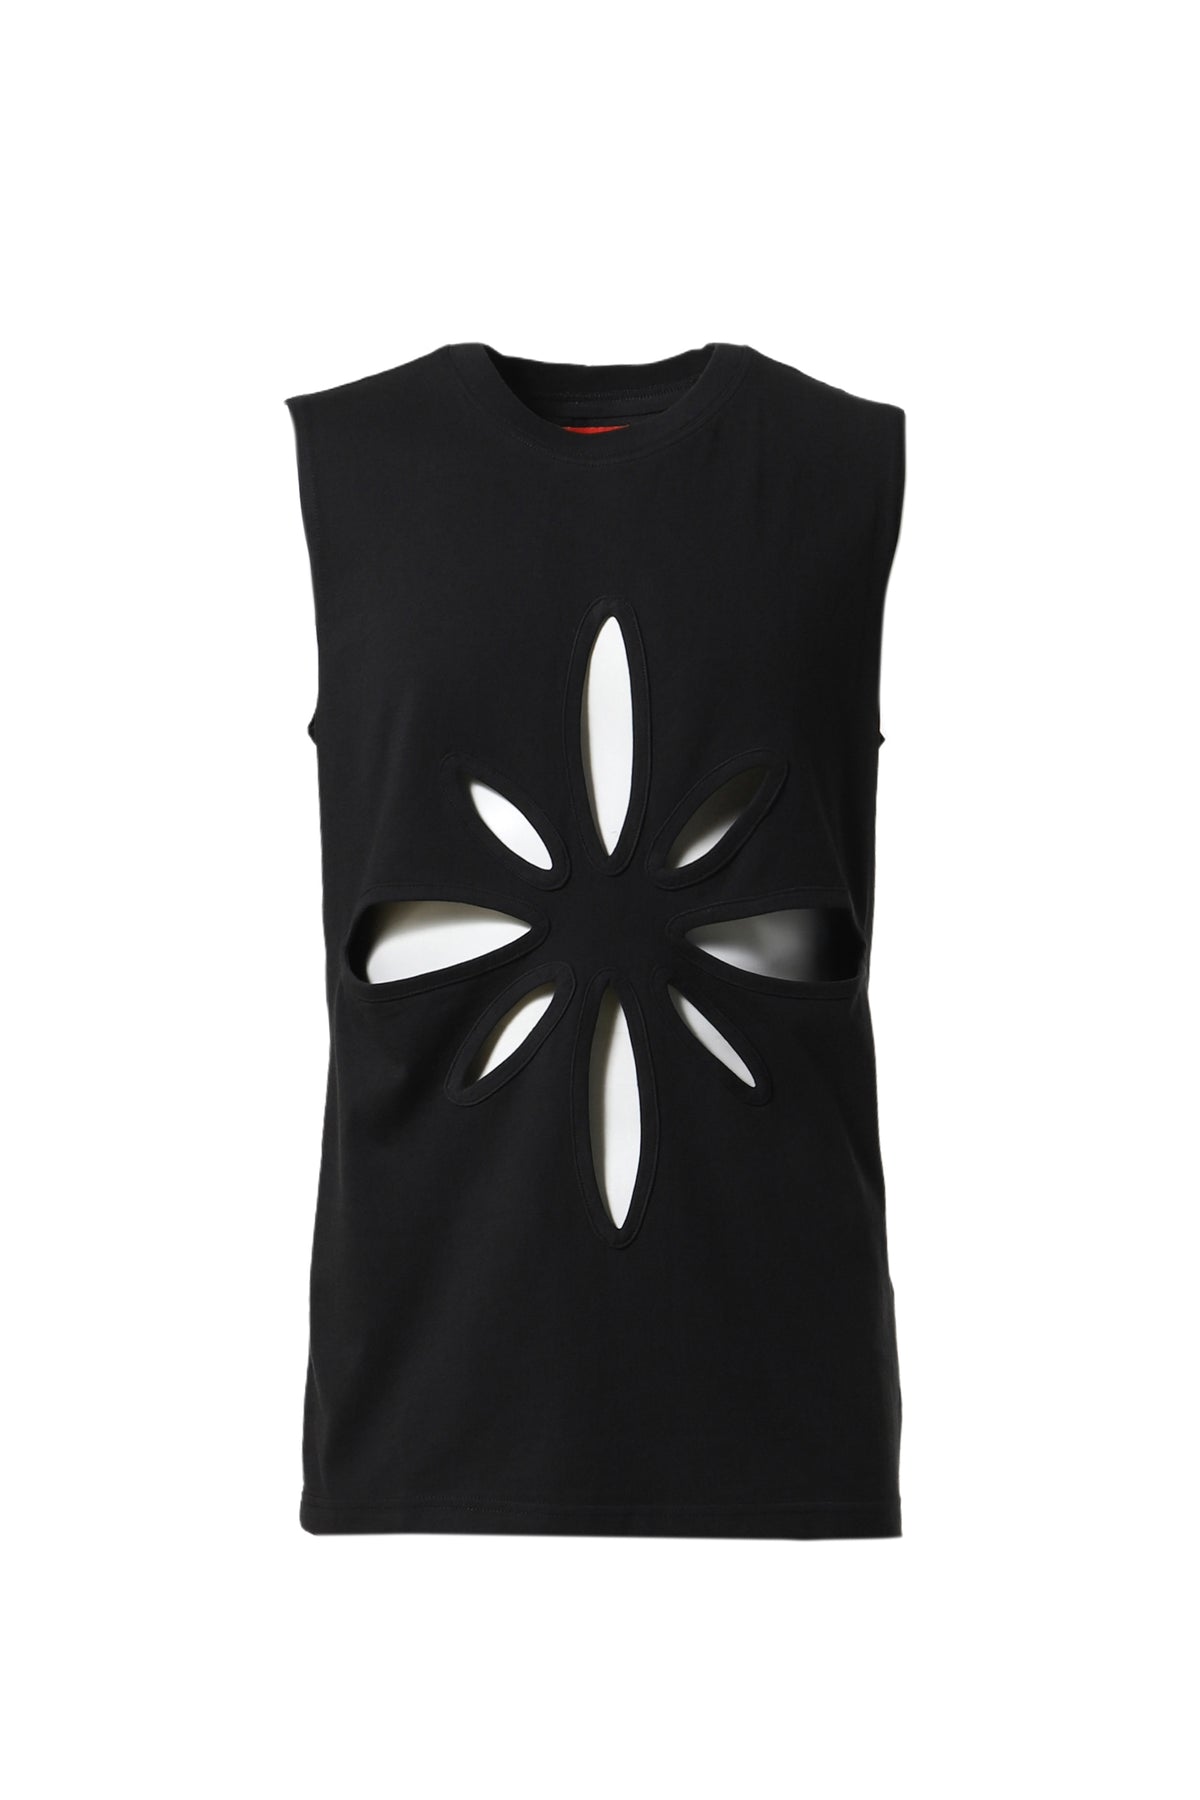 ORIGAMI CUT-OUTSLEEVELESS TOP / BLK